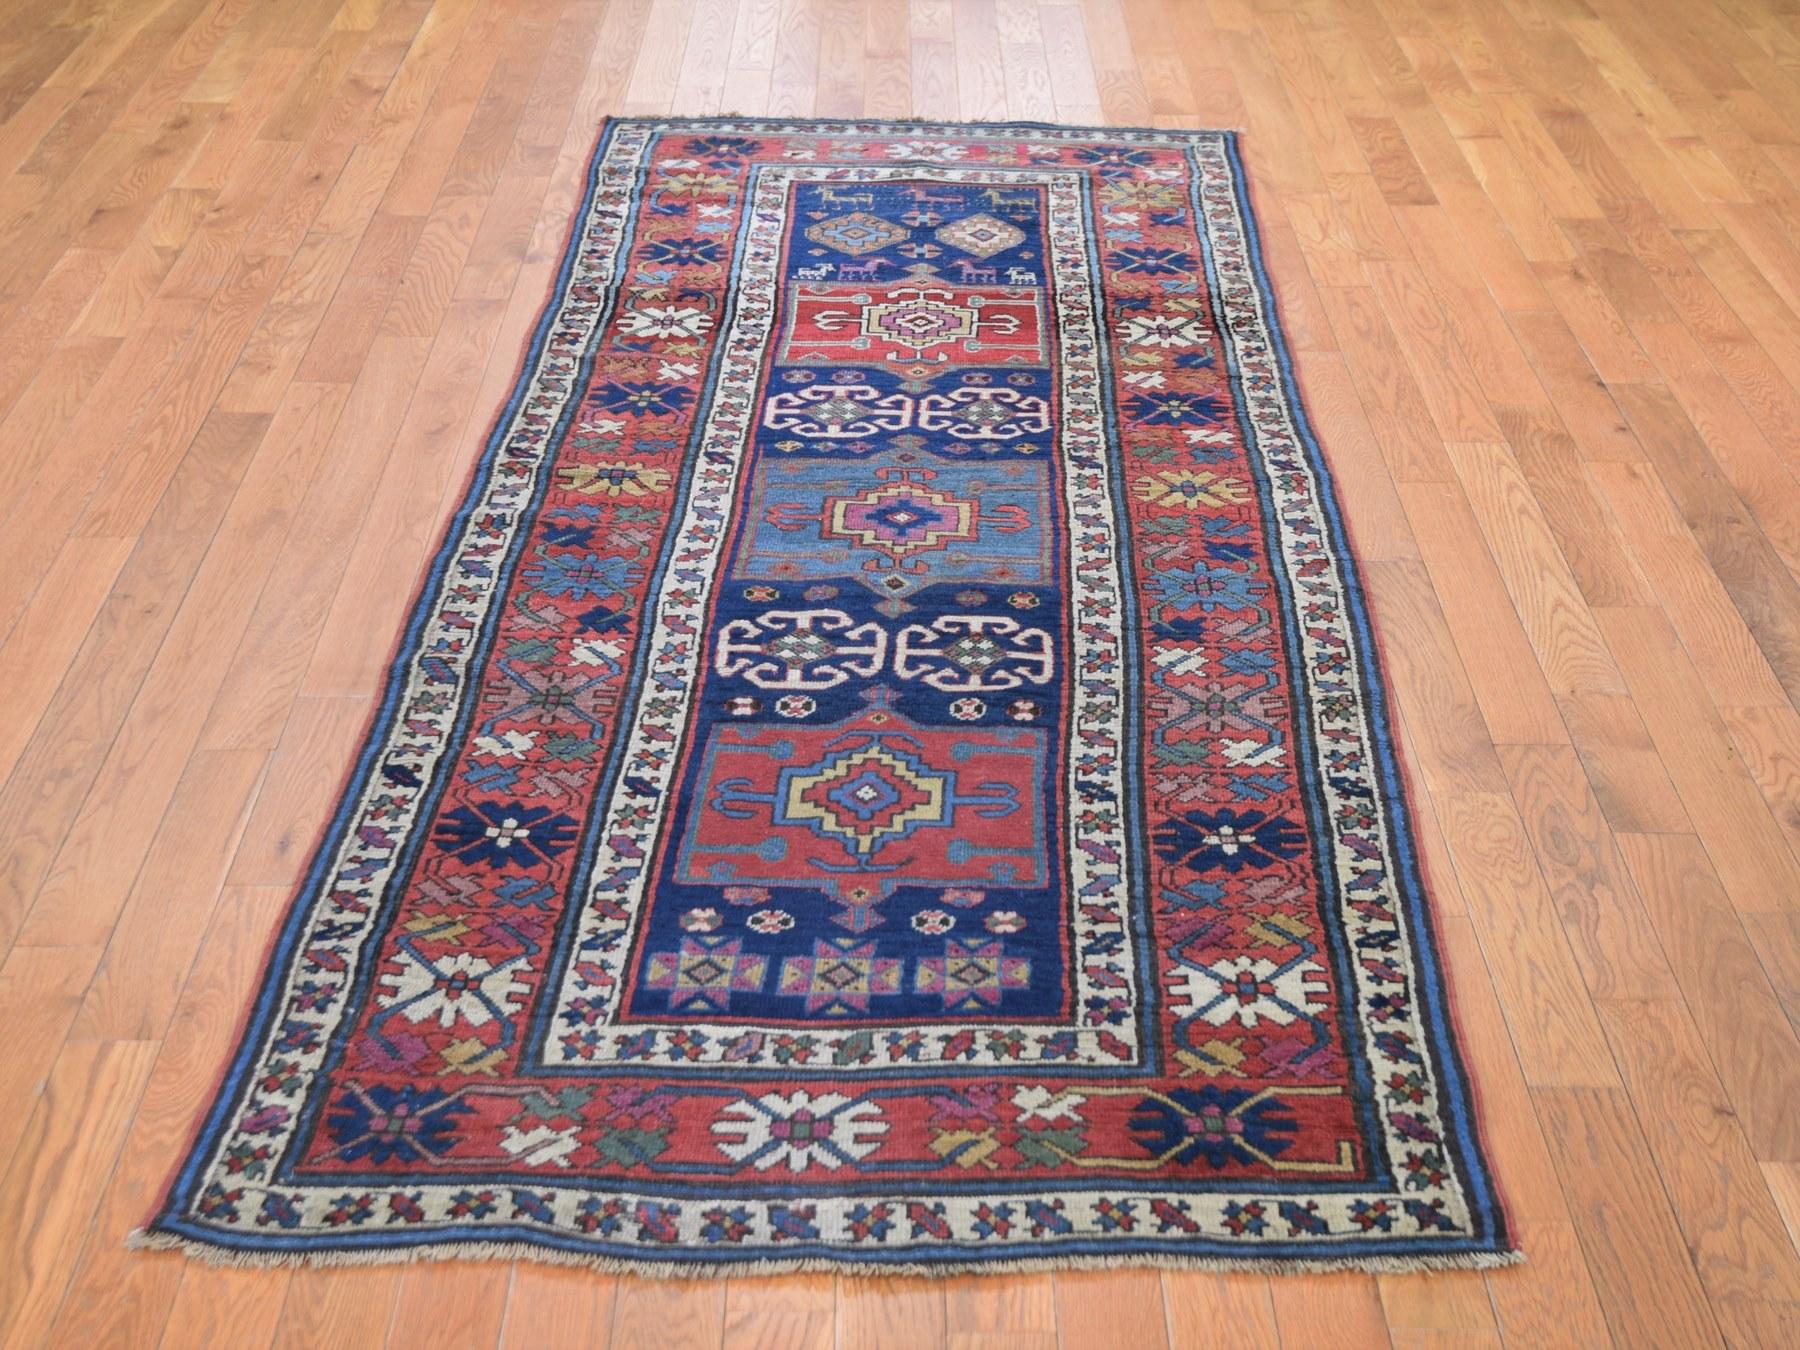 This is a truly genuine one-of-a-kind antique Caucasian Kazak with eggplant color exc condition wide runner rug. It has been knotted for months and months in the centuries-old Persian weaving craftsmanship techniques by expert artisans.

Primary